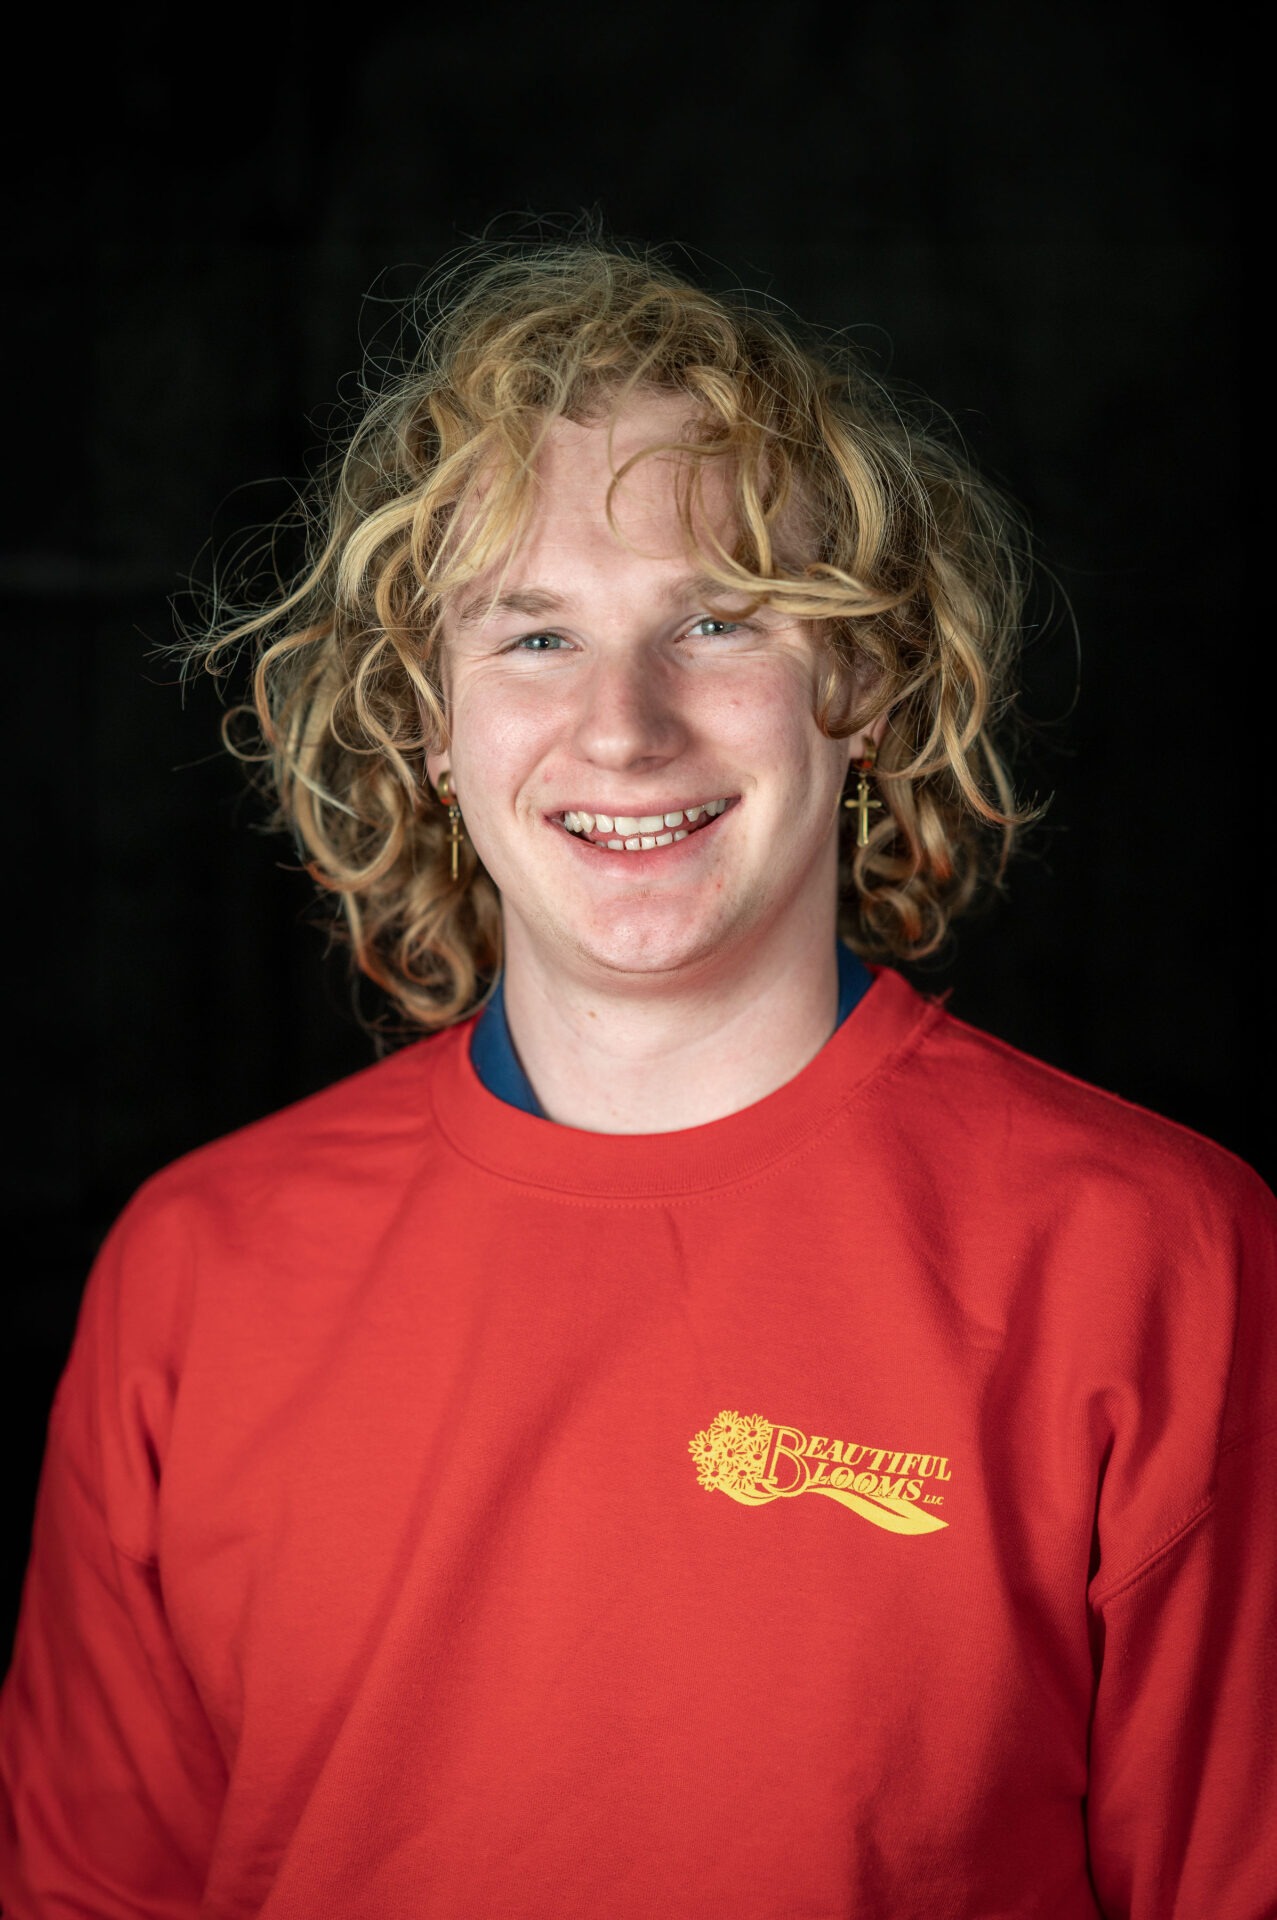 A smiling person with curly blonde hair, wearing a red long-sleeved shirt with a logo, against a dark background. The person exudes a joyful demeanor.